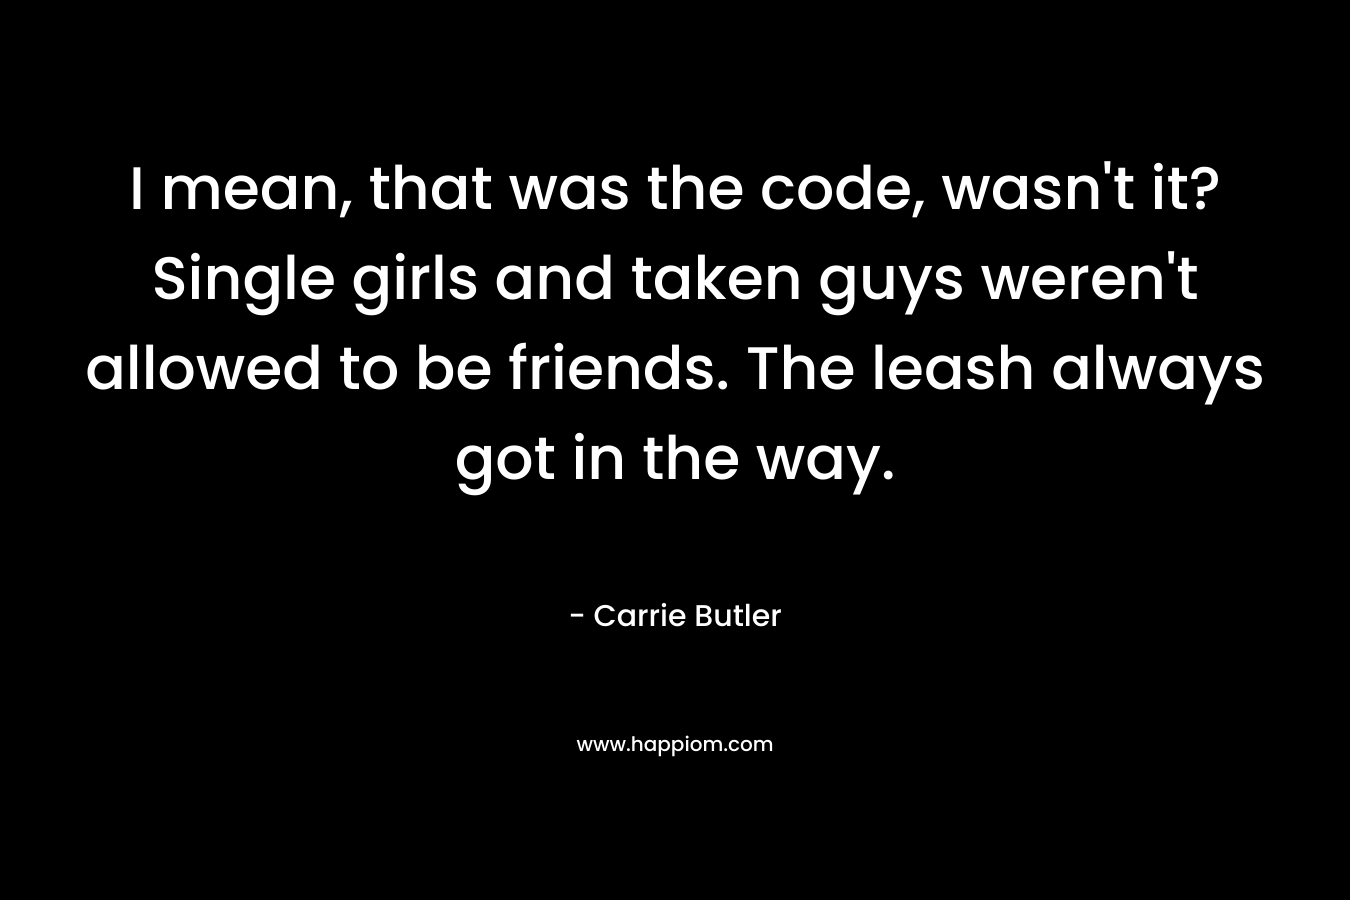 I mean, that was the code, wasn't it? Single girls and taken guys weren't allowed to be friends. The leash always got in the way.